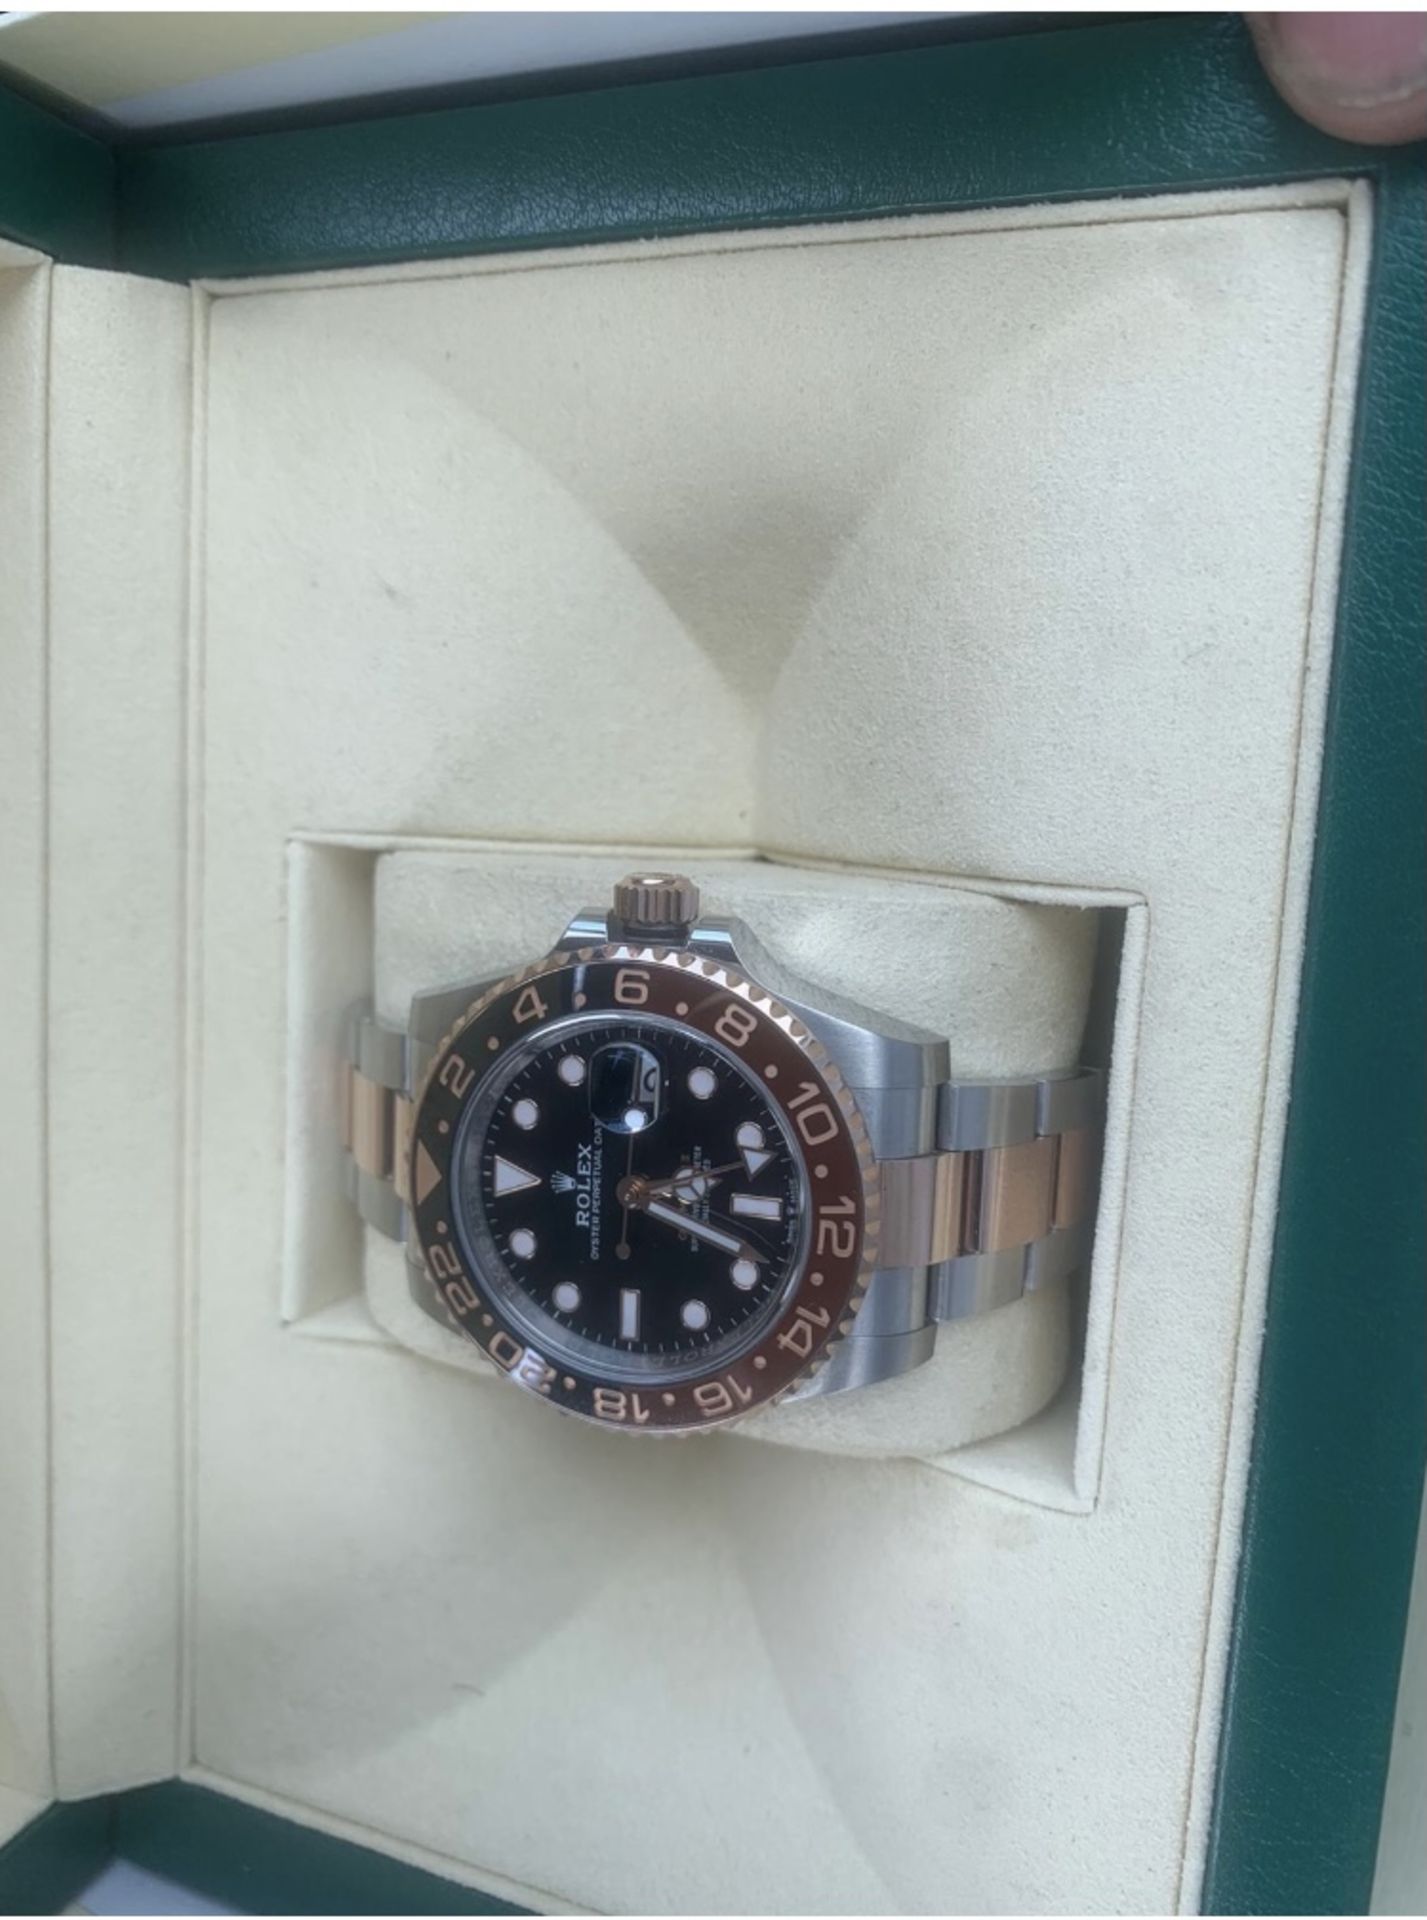 2019 ROLEX GMT MASTER 11 ROOT BEER WATCH LOCATION NORTH YORKSHIRE. - Image 4 of 6